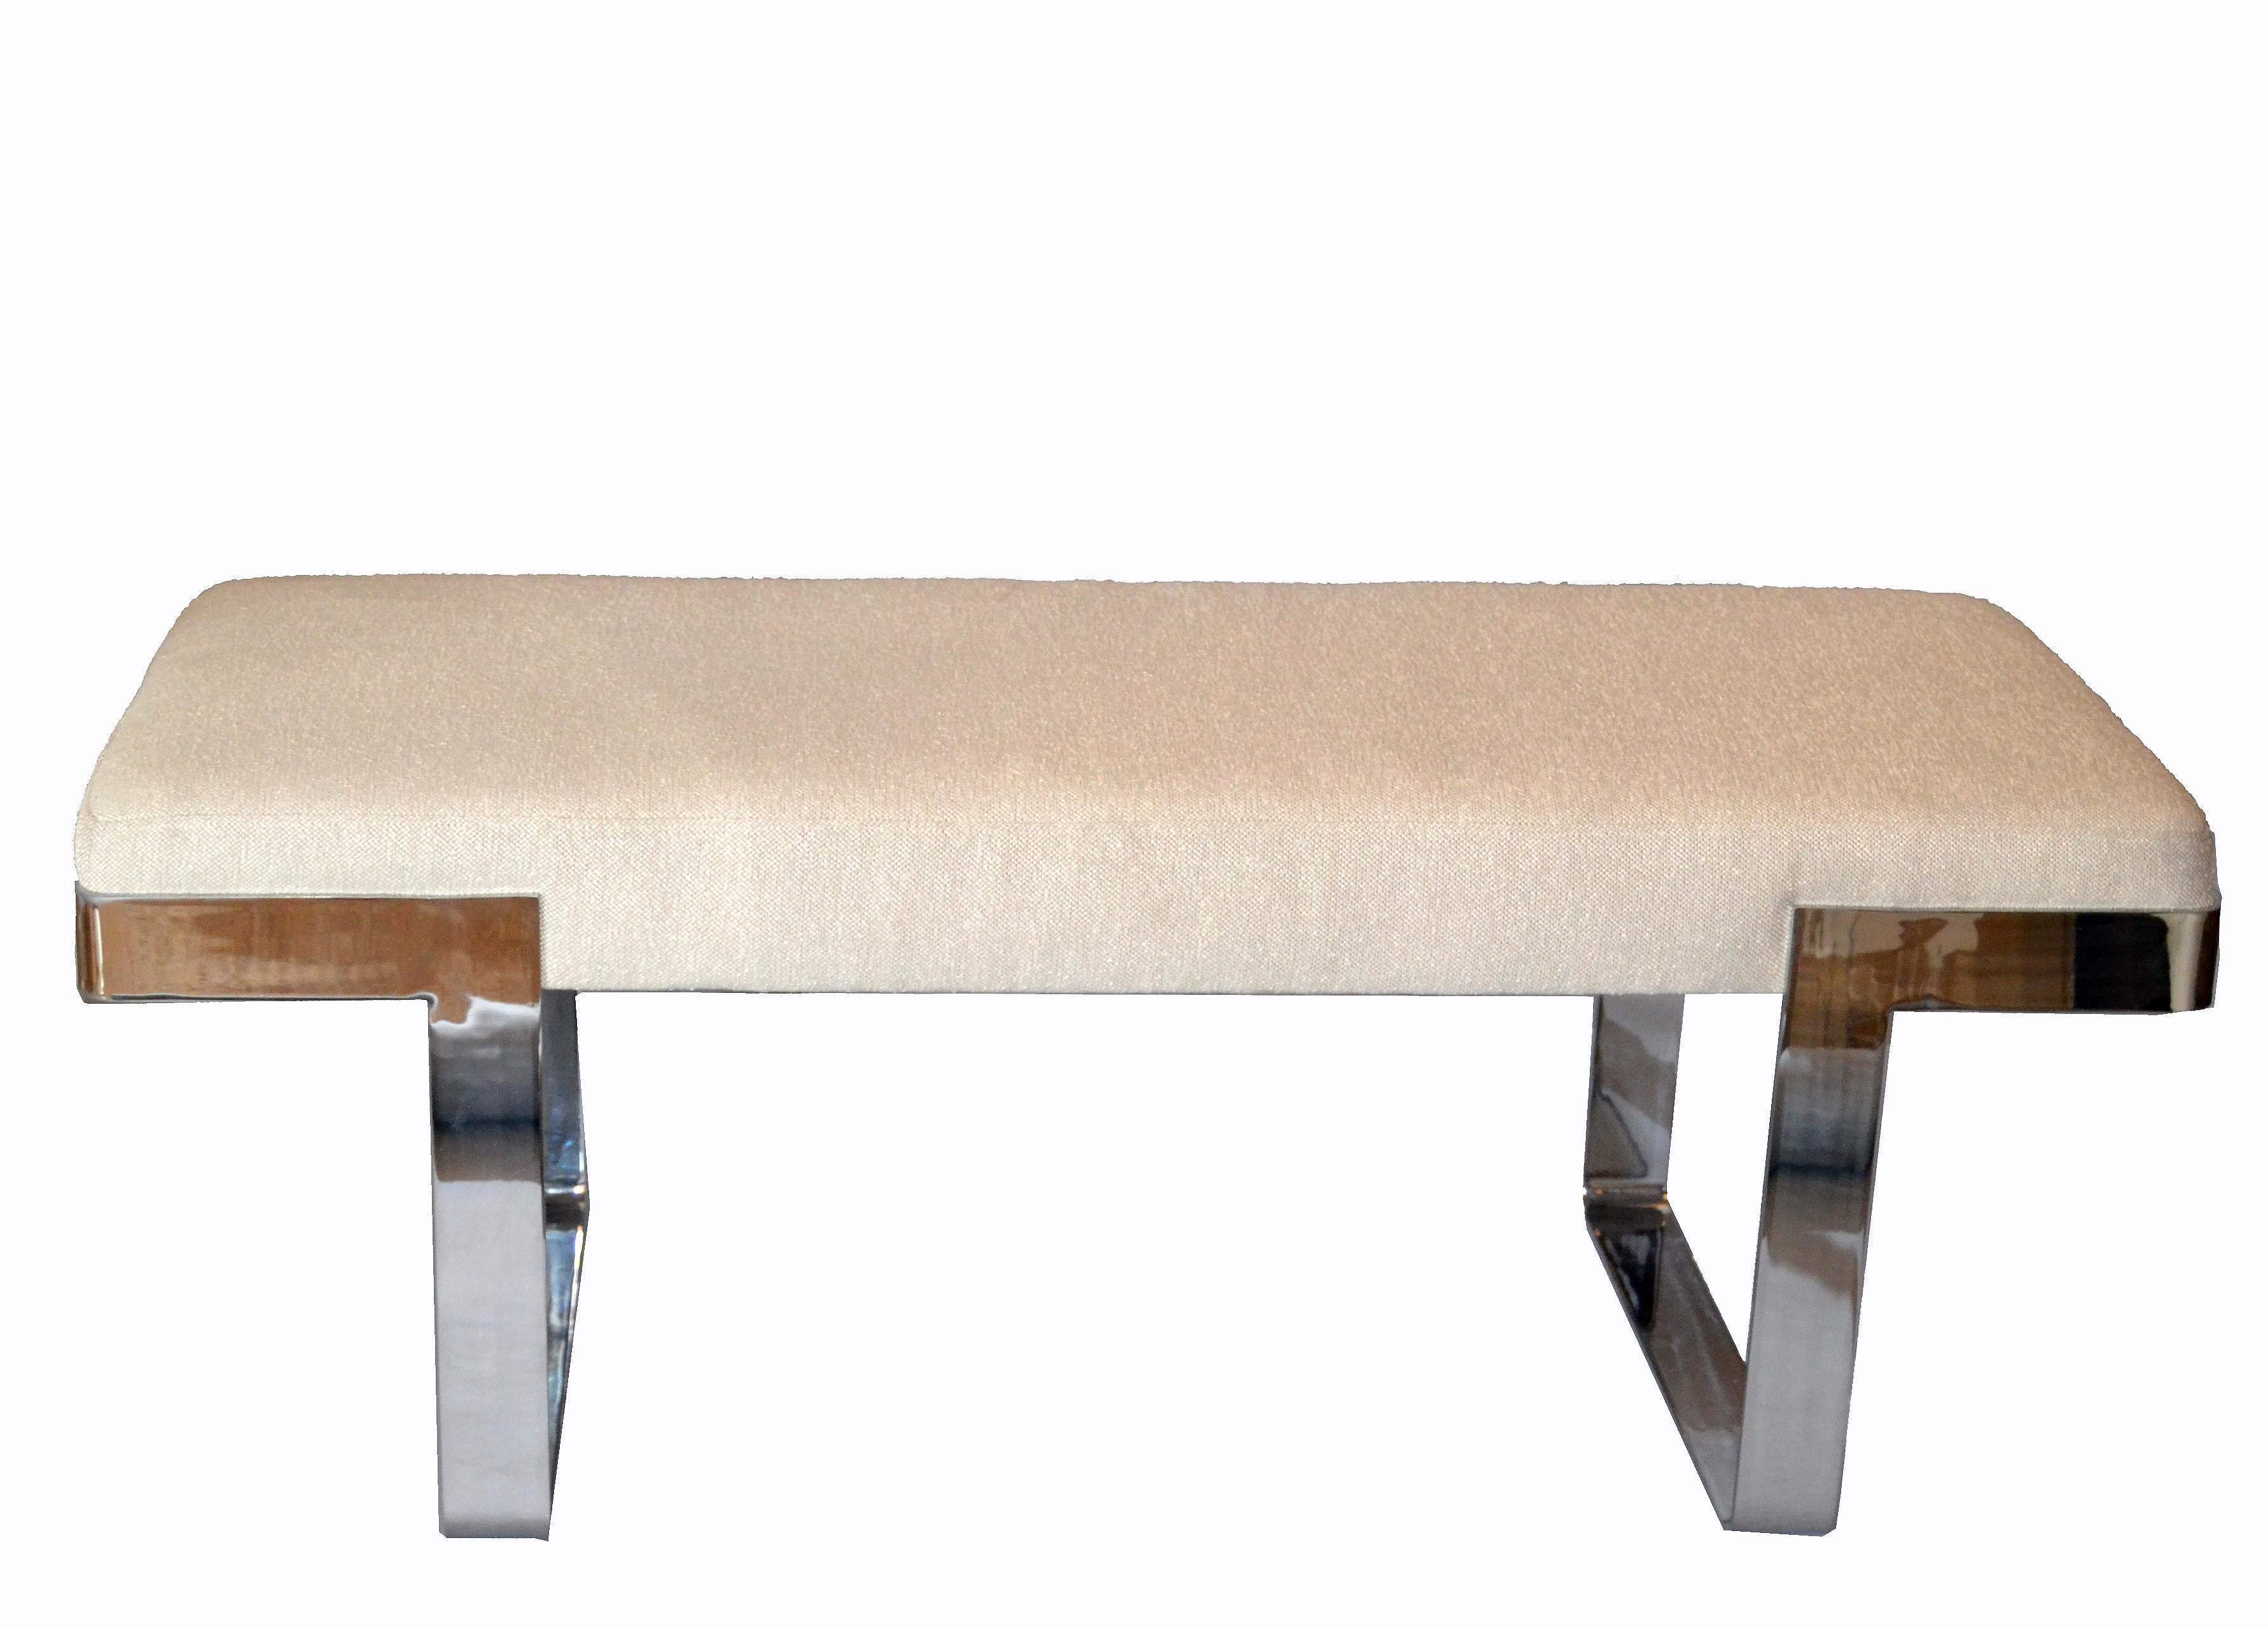 1 of 2 Milo Baughman Benches Linen Fabric in Beige on Steel Base Pace Collection 4